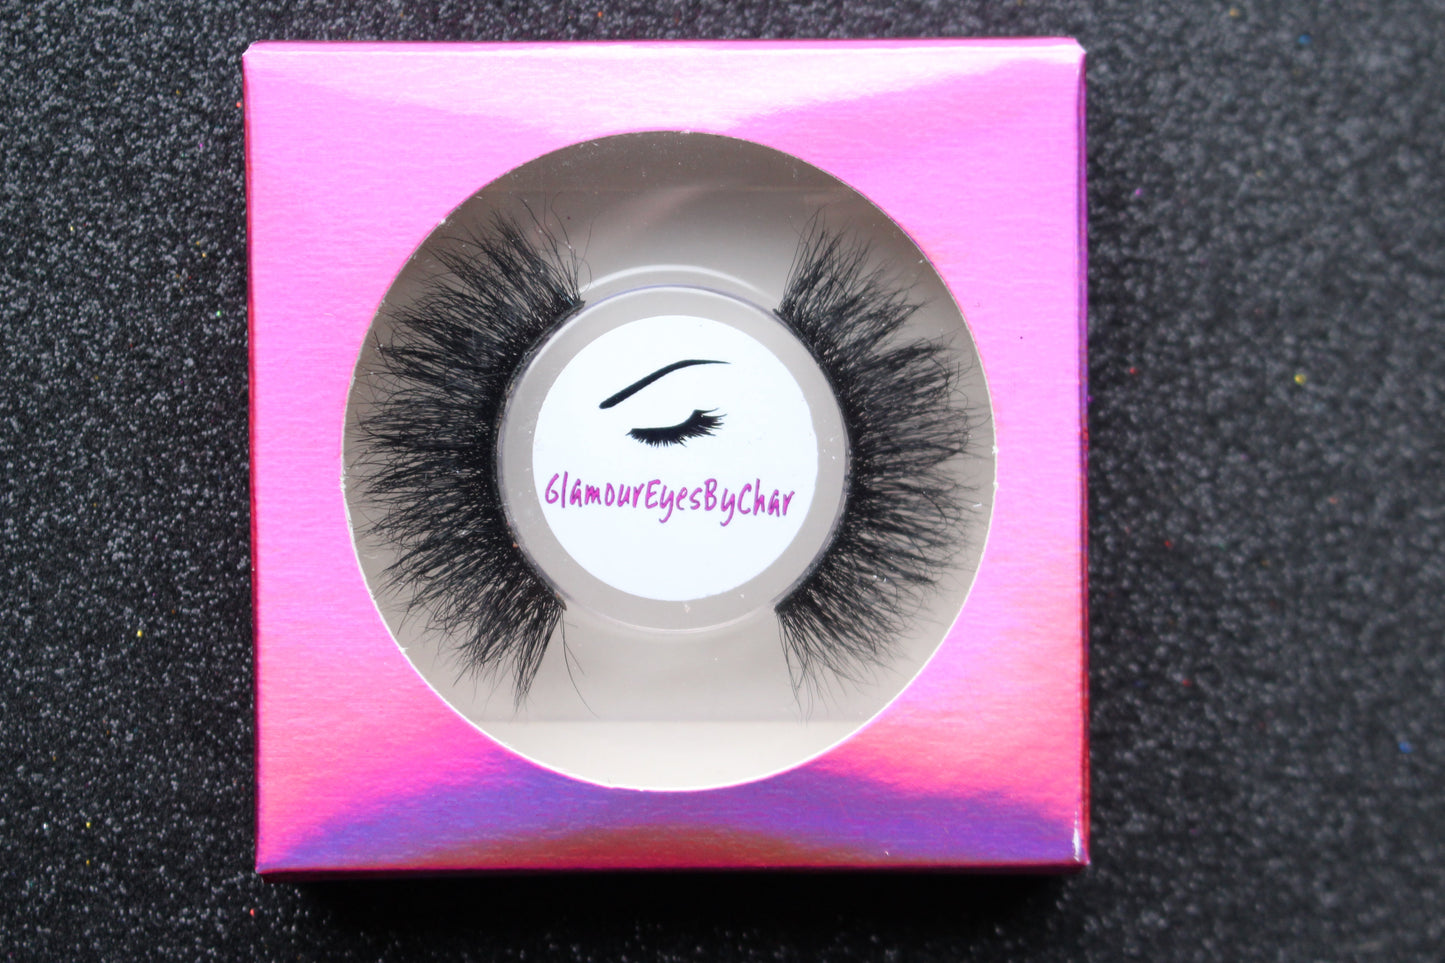 These 3D premium mink lashes are 18-20mm in length. They are soft, lightweight, and very comfortable to wear on the lids. The flexible cotton lash band, makes the application process a breeze. Pixie lashes are suitable for everyday use, with a soft natural look. They are perfect for a beginner lash wearer and for smaller eyes. You can wear this reusable style up to 25 times if handled with care. Lashes come with a cute bag, and a mascara wand so that you can take care of these beauties. 